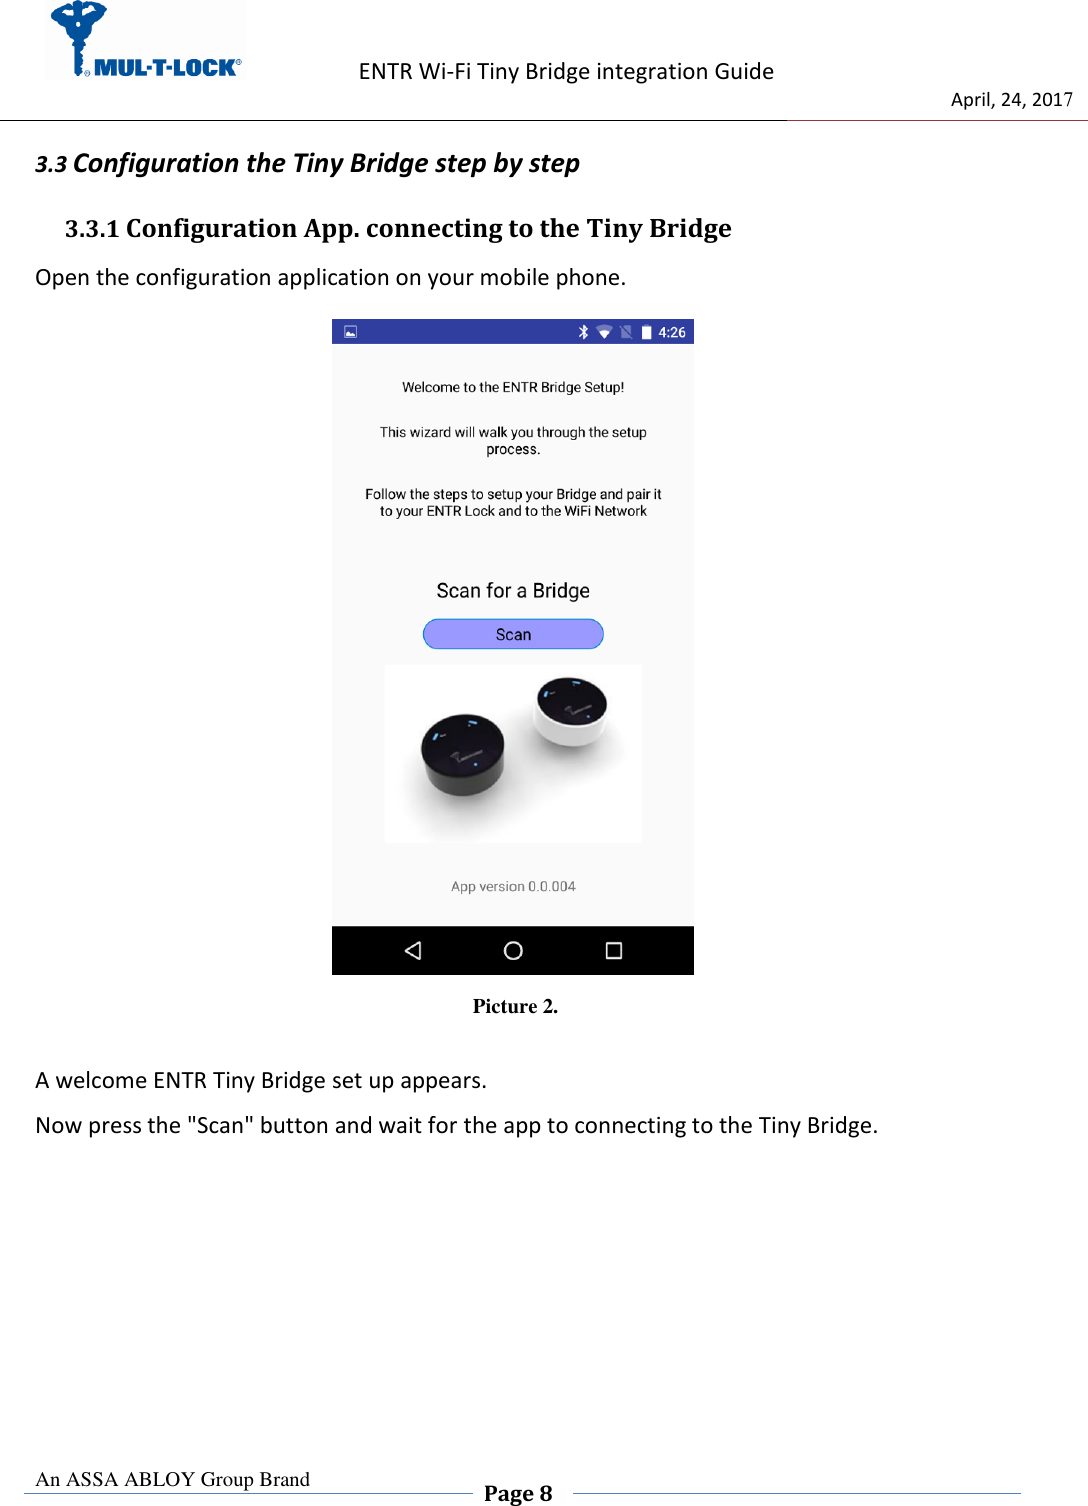                   ENTR Wi-Fi Tiny Bridge integration Guide     de                                 April, 24, 2017  An ASSA ABLOY Group Brand  Page 8    3.3 Configuration the Tiny Bridge step by step  3.3.1 Configuration App. connecting to the Tiny Bridge  Open the configuration application on your mobile phone.                            Picture 2.  A welcome ENTR Tiny Bridge set up appears. Now press the &quot;Scan&quot; button and wait for the app to connecting to the Tiny Bridge.       